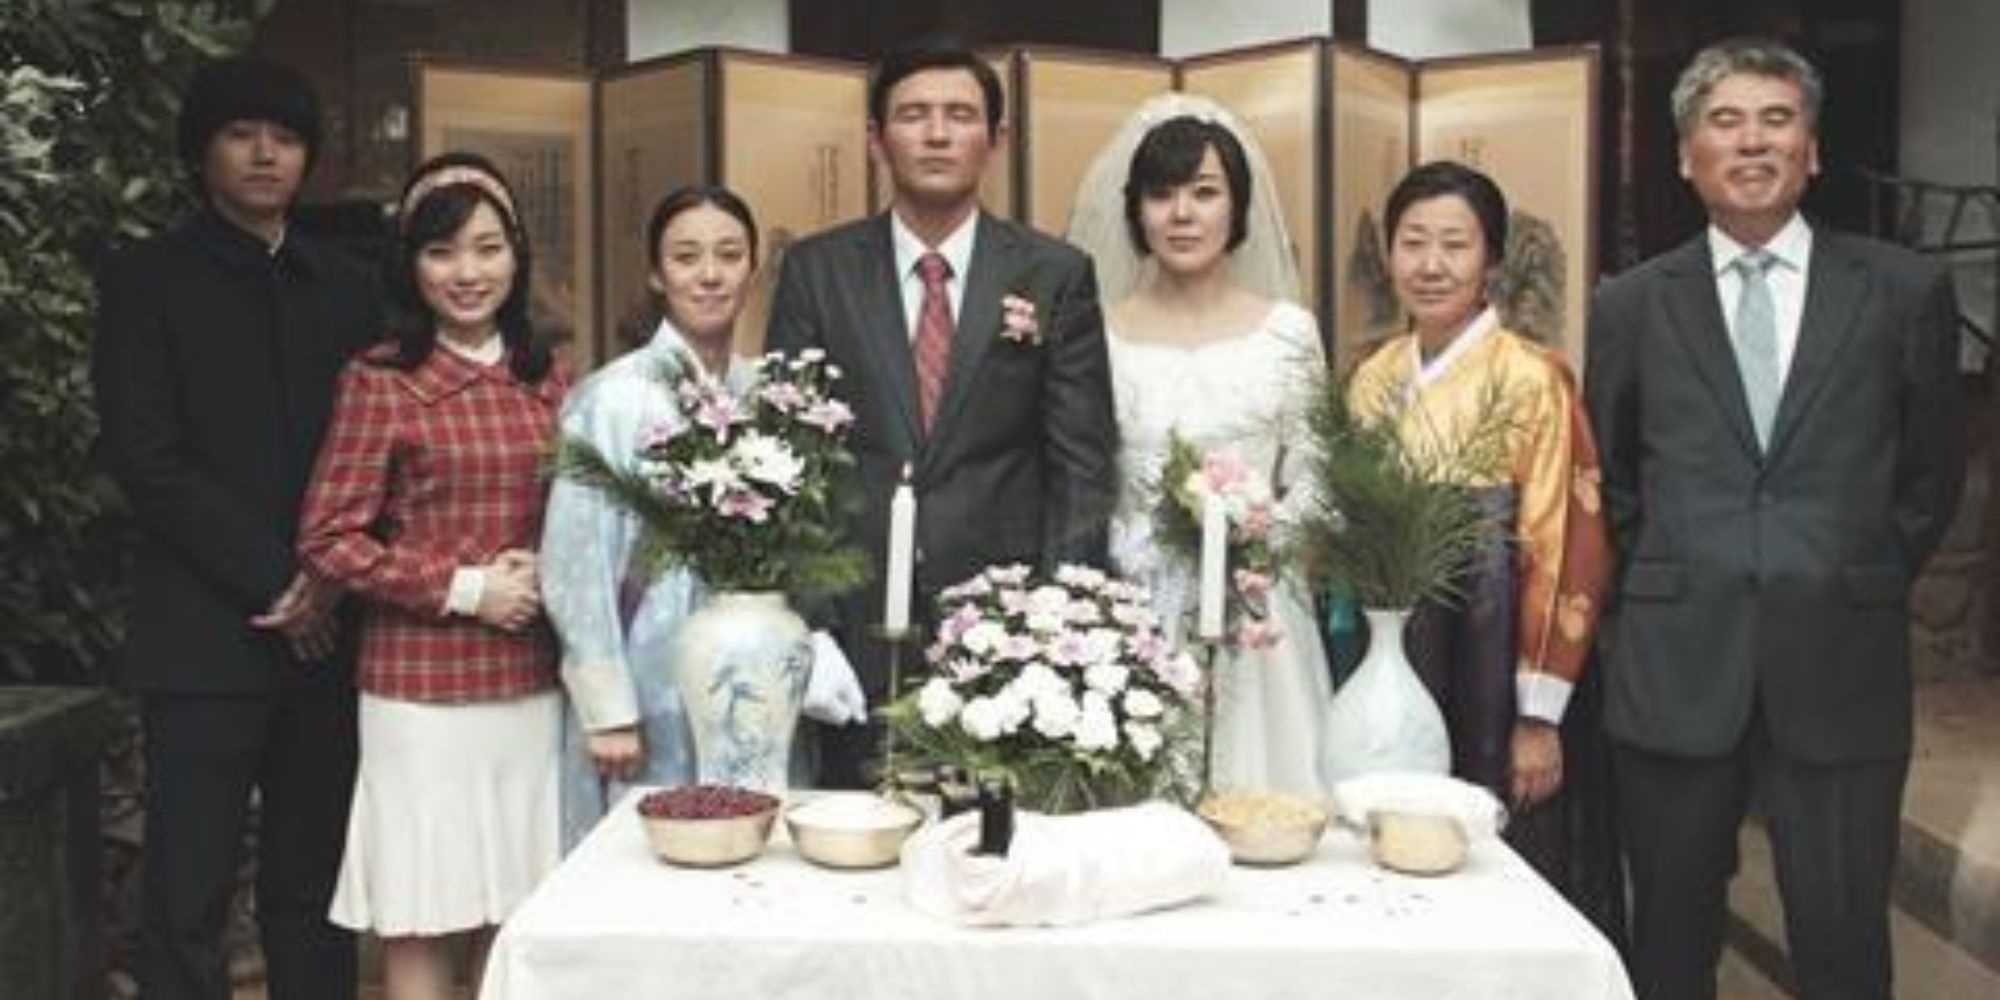 A South Korean family wedding picture